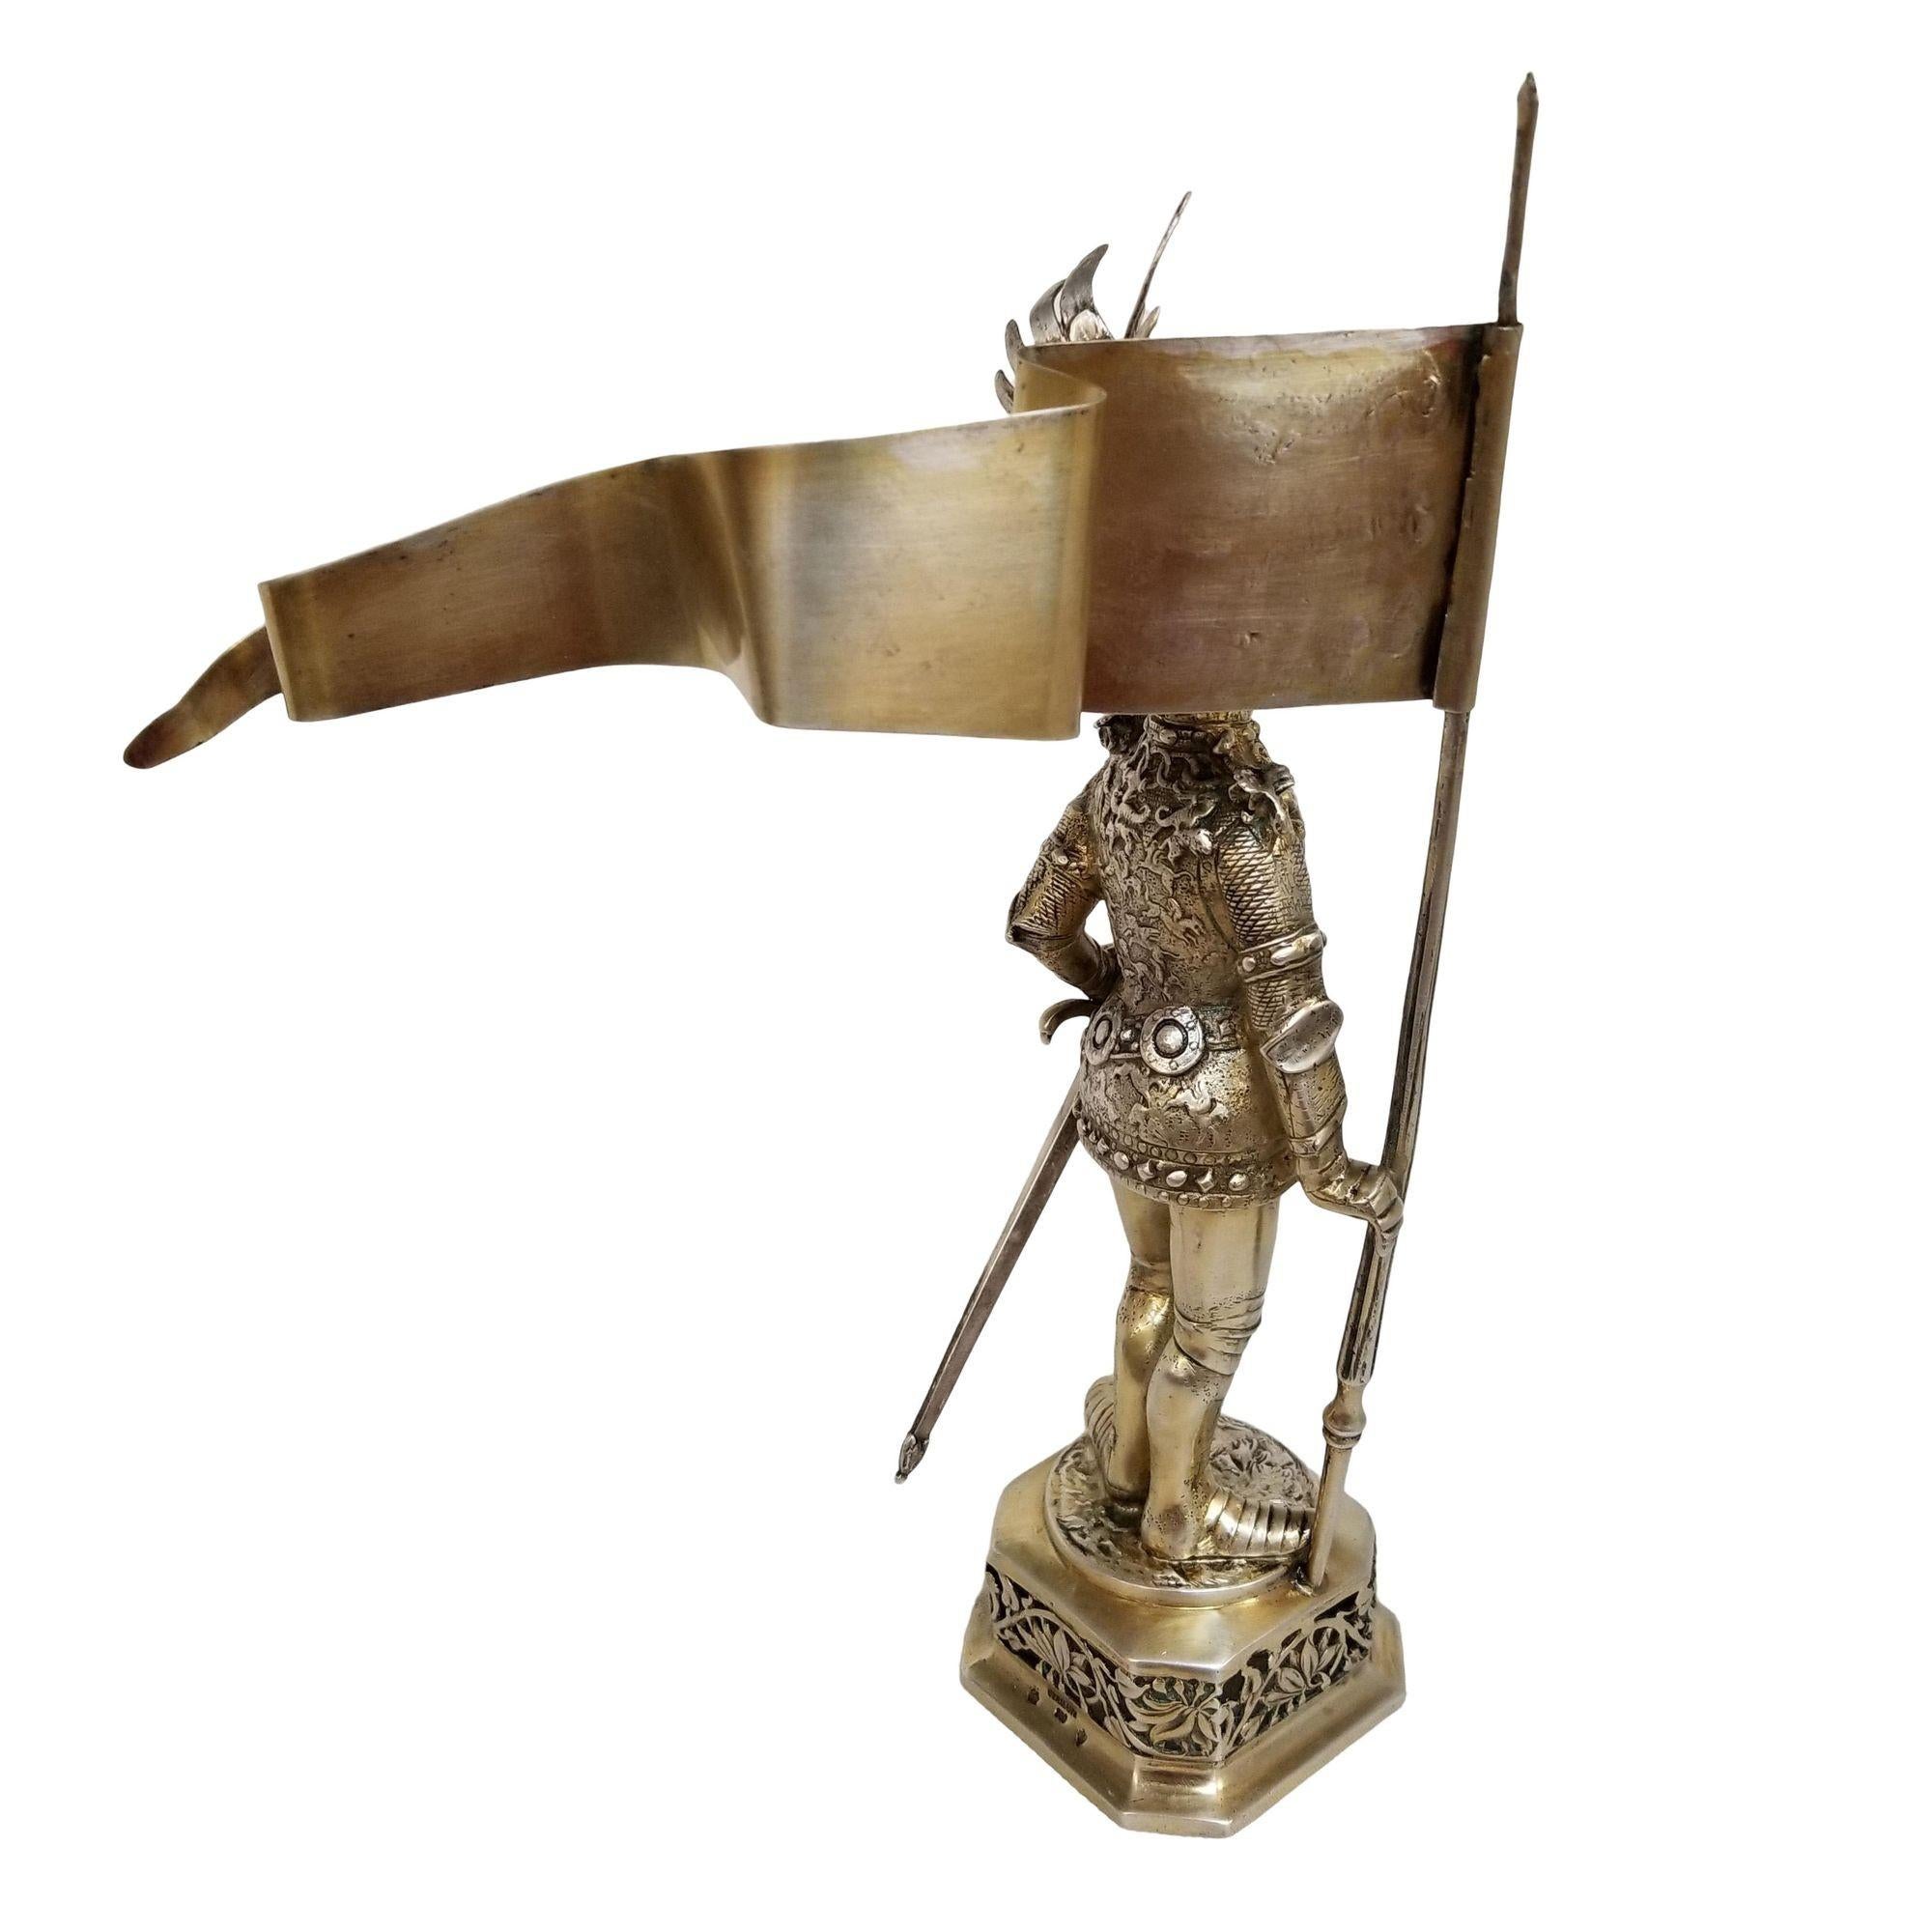 This antique sterling silver knight figurine from the 19th century is a captivating masterpiece. Dressed in full medieval armor with a staff and flag, the movable visors and intricately engraved coat-of-arms display unparalleled craftsmanship.